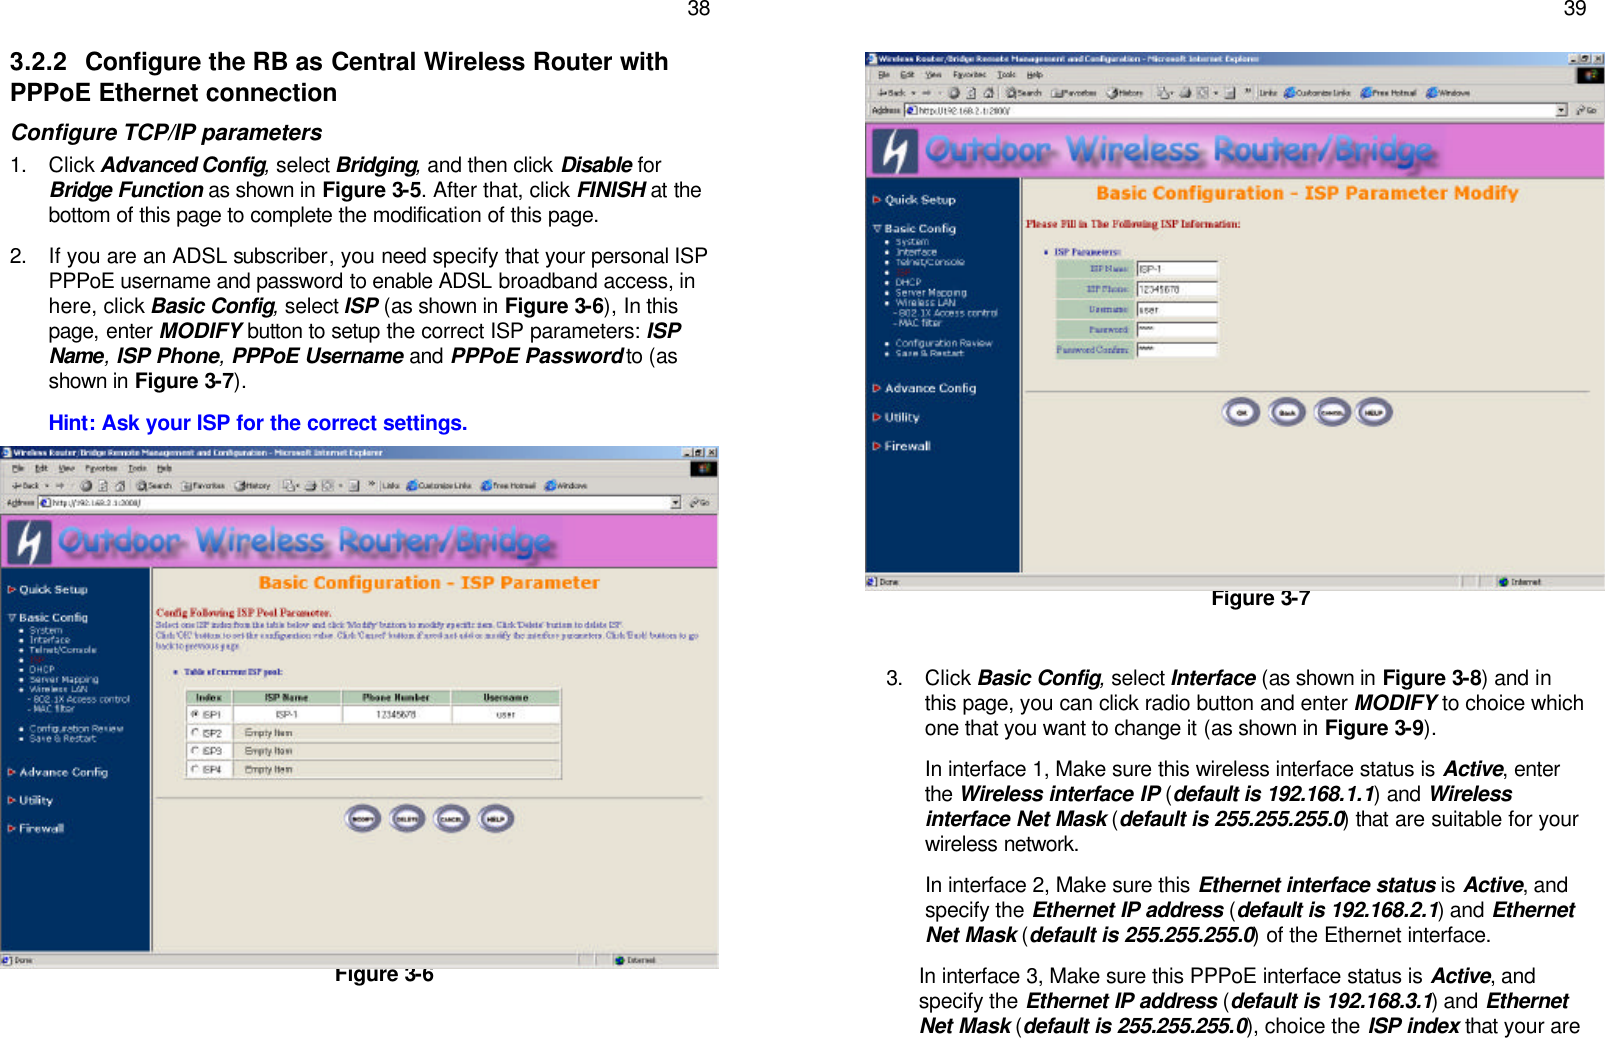   38 3.2.2 Configure the RB as Central Wireless Router with PPPoE Ethernet connection Configure TCP/IP parameters 1. Click Advanced Config, select Bridging, and then click Disable for Bridge Function as shown in Figure 3-5. After that, click FINISH at the bottom of this page to complete the modification of this page. 2. If you are an ADSL subscriber, you need specify that your personal ISP PPPoE username and password to enable ADSL broadband access, in here, click Basic Config, select ISP (as shown in Figure 3-6), In this page, enter MODIFY button to setup the correct ISP parameters: ISP Name, ISP Phone, PPPoE Username and PPPoE Password to (as shown in Figure 3-7). Hint: Ask your ISP for the correct settings.                 Figure 3-6    39                  Figure 3-7  3. Click Basic Config, select Interface (as shown in Figure 3-8) and in this page, you can click radio button and enter MODIFY to choice which one that you want to change it (as shown in Figure 3-9).  In interface 1, Make sure this wireless interface status is Active, enter the Wireless interface IP (default is 192.168.1.1) and Wireless interface Net Mask (default is 255.255.255.0) that are suitable for your wireless network. In interface 2, Make sure this Ethernet interface status is Active, and specify the Ethernet IP address (default is 192.168.2.1) and Ethernet Net Mask (default is 255.255.255.0) of the Ethernet interface.  In interface 3, Make sure this PPPoE interface status is Active, and specify the Ethernet IP address (default is 192.168.3.1) and Ethernet Net Mask (default is 255.255.255.0), choice the ISP index that your are  